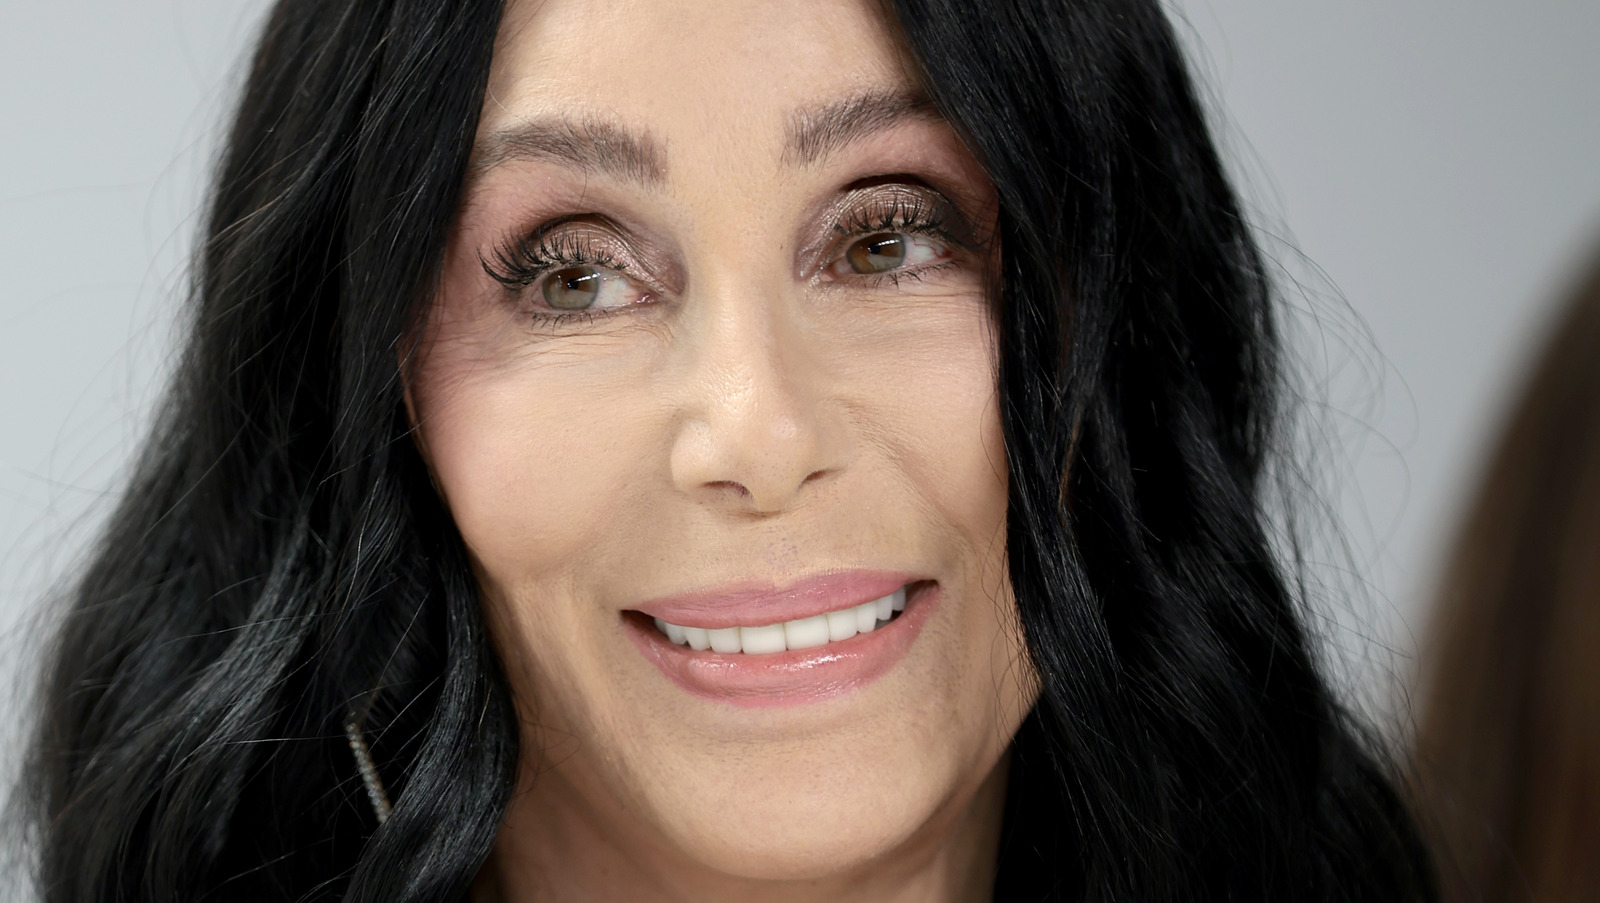 Cher’s New Romance According To Sources